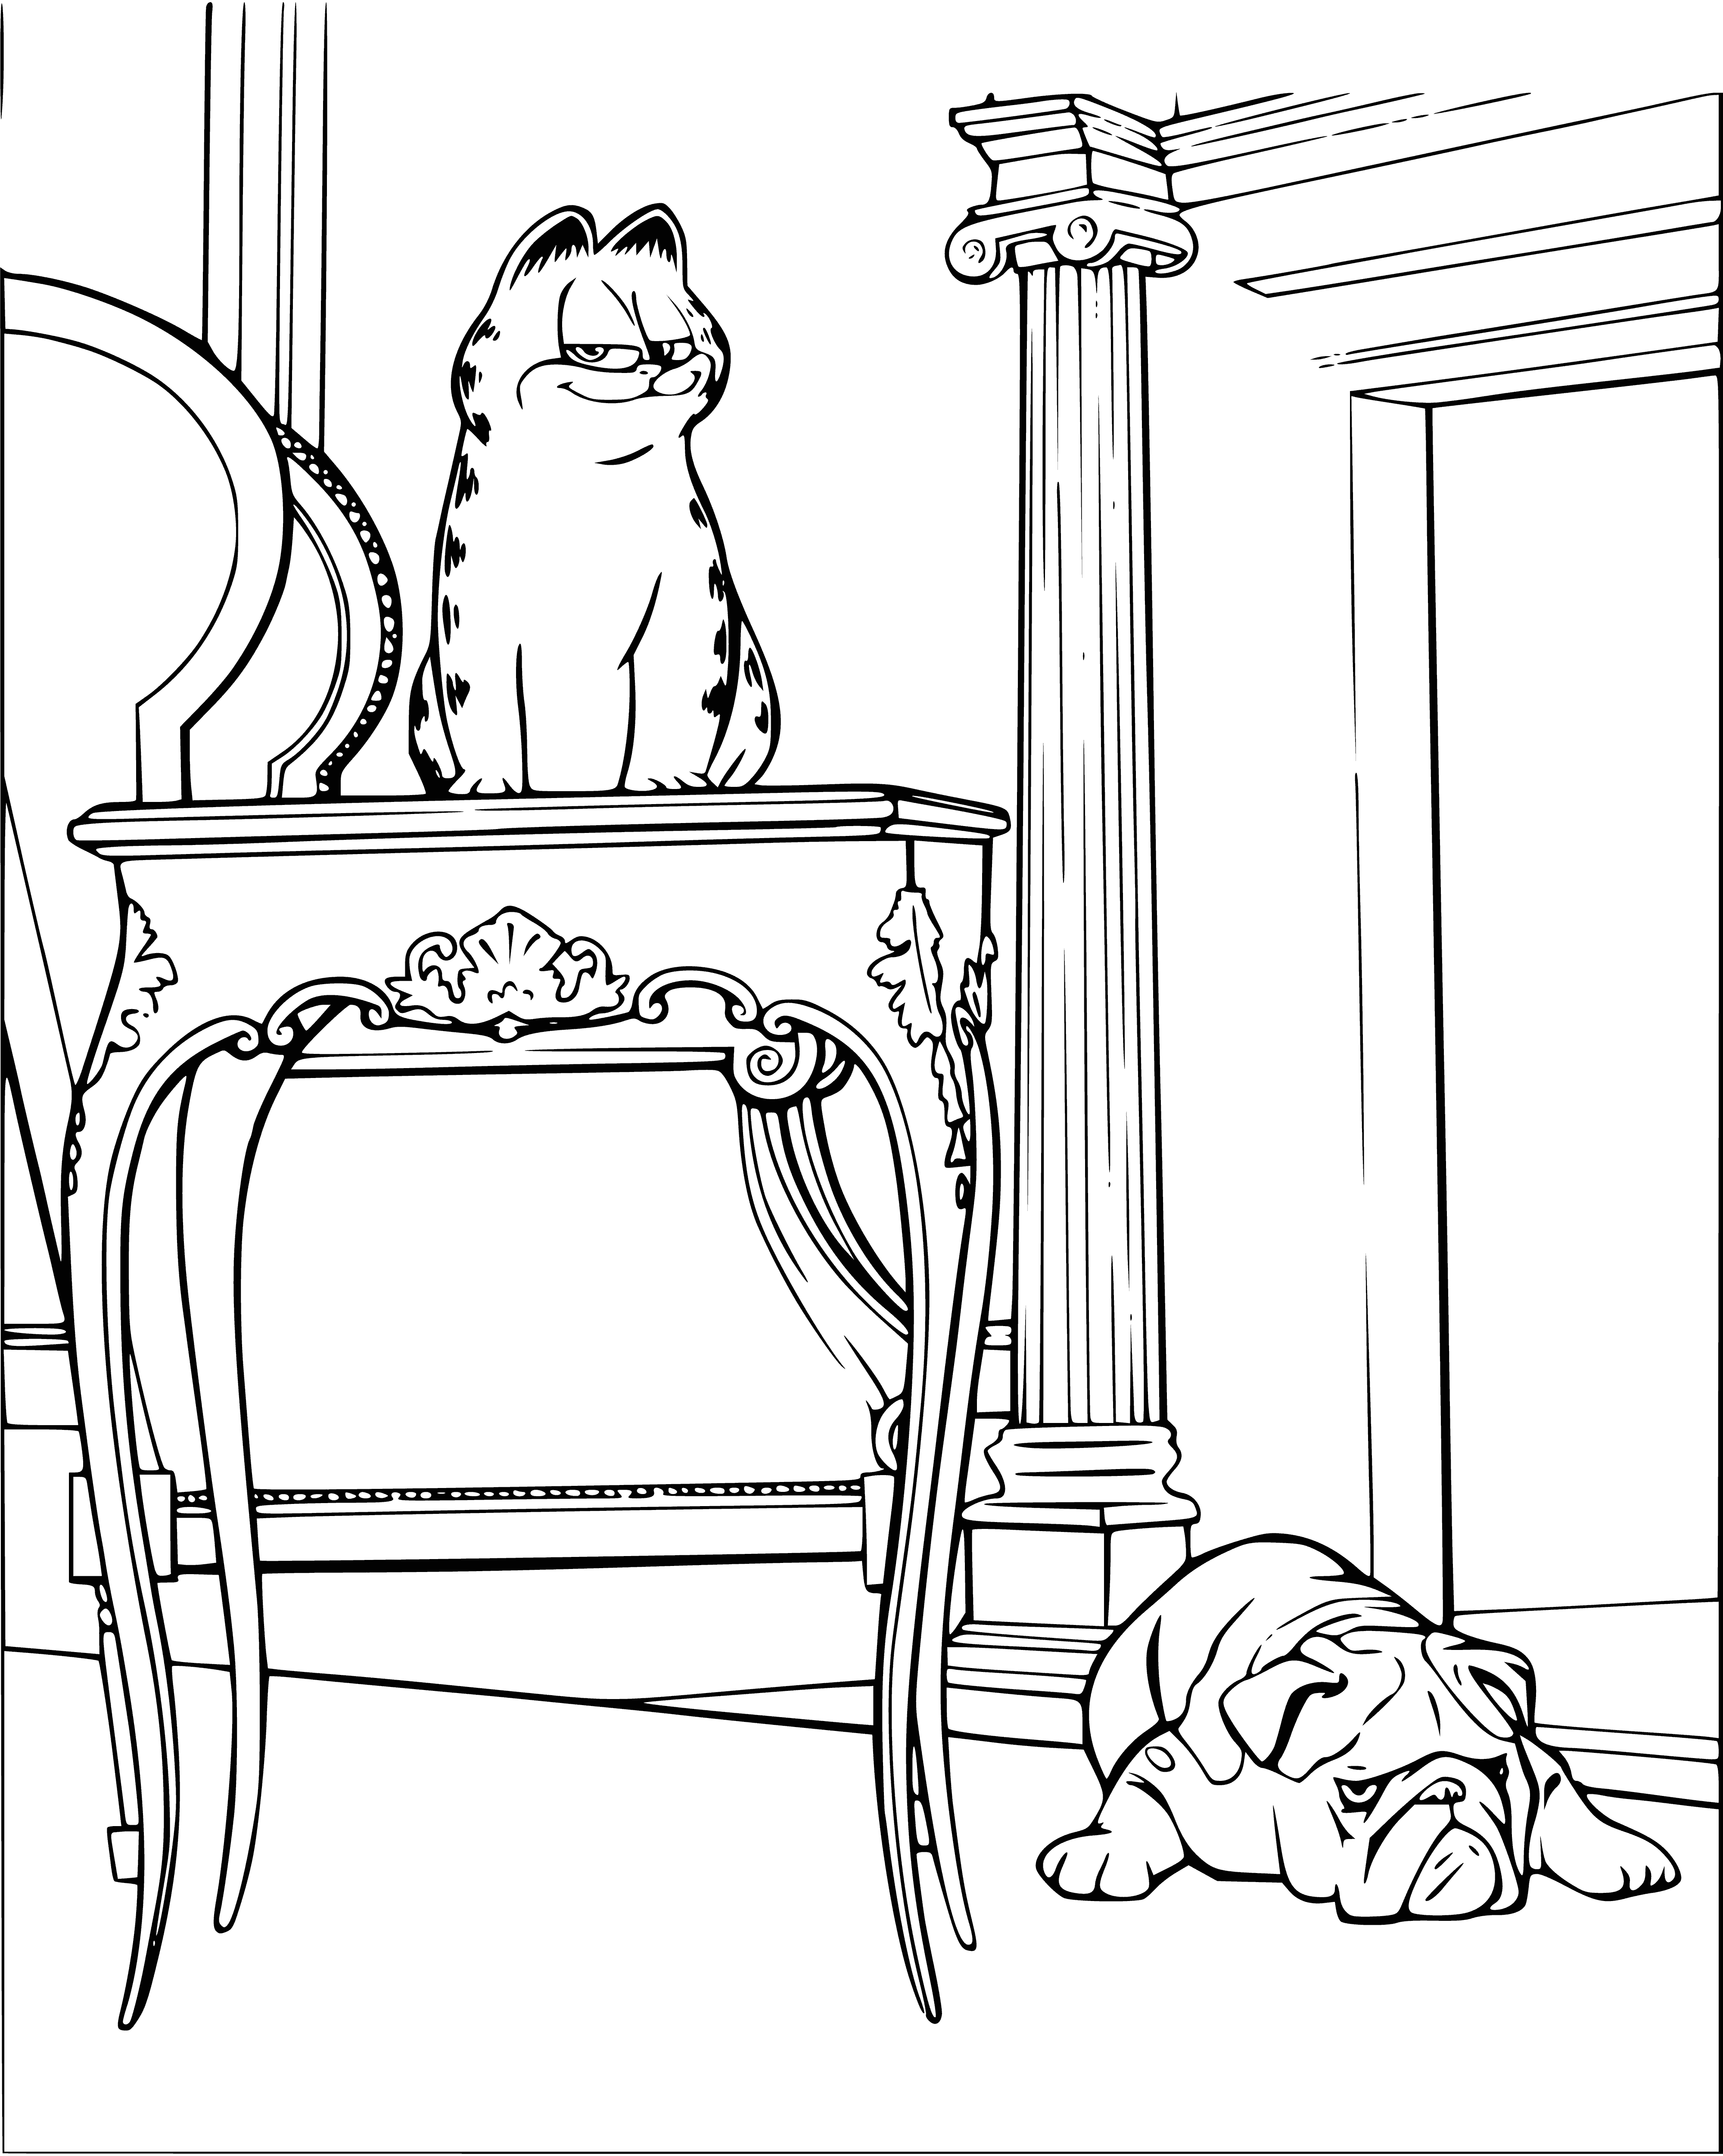 coloring page: Cartoon cat Garfield sits bored on a happy dog with tongue out on a coloring page.